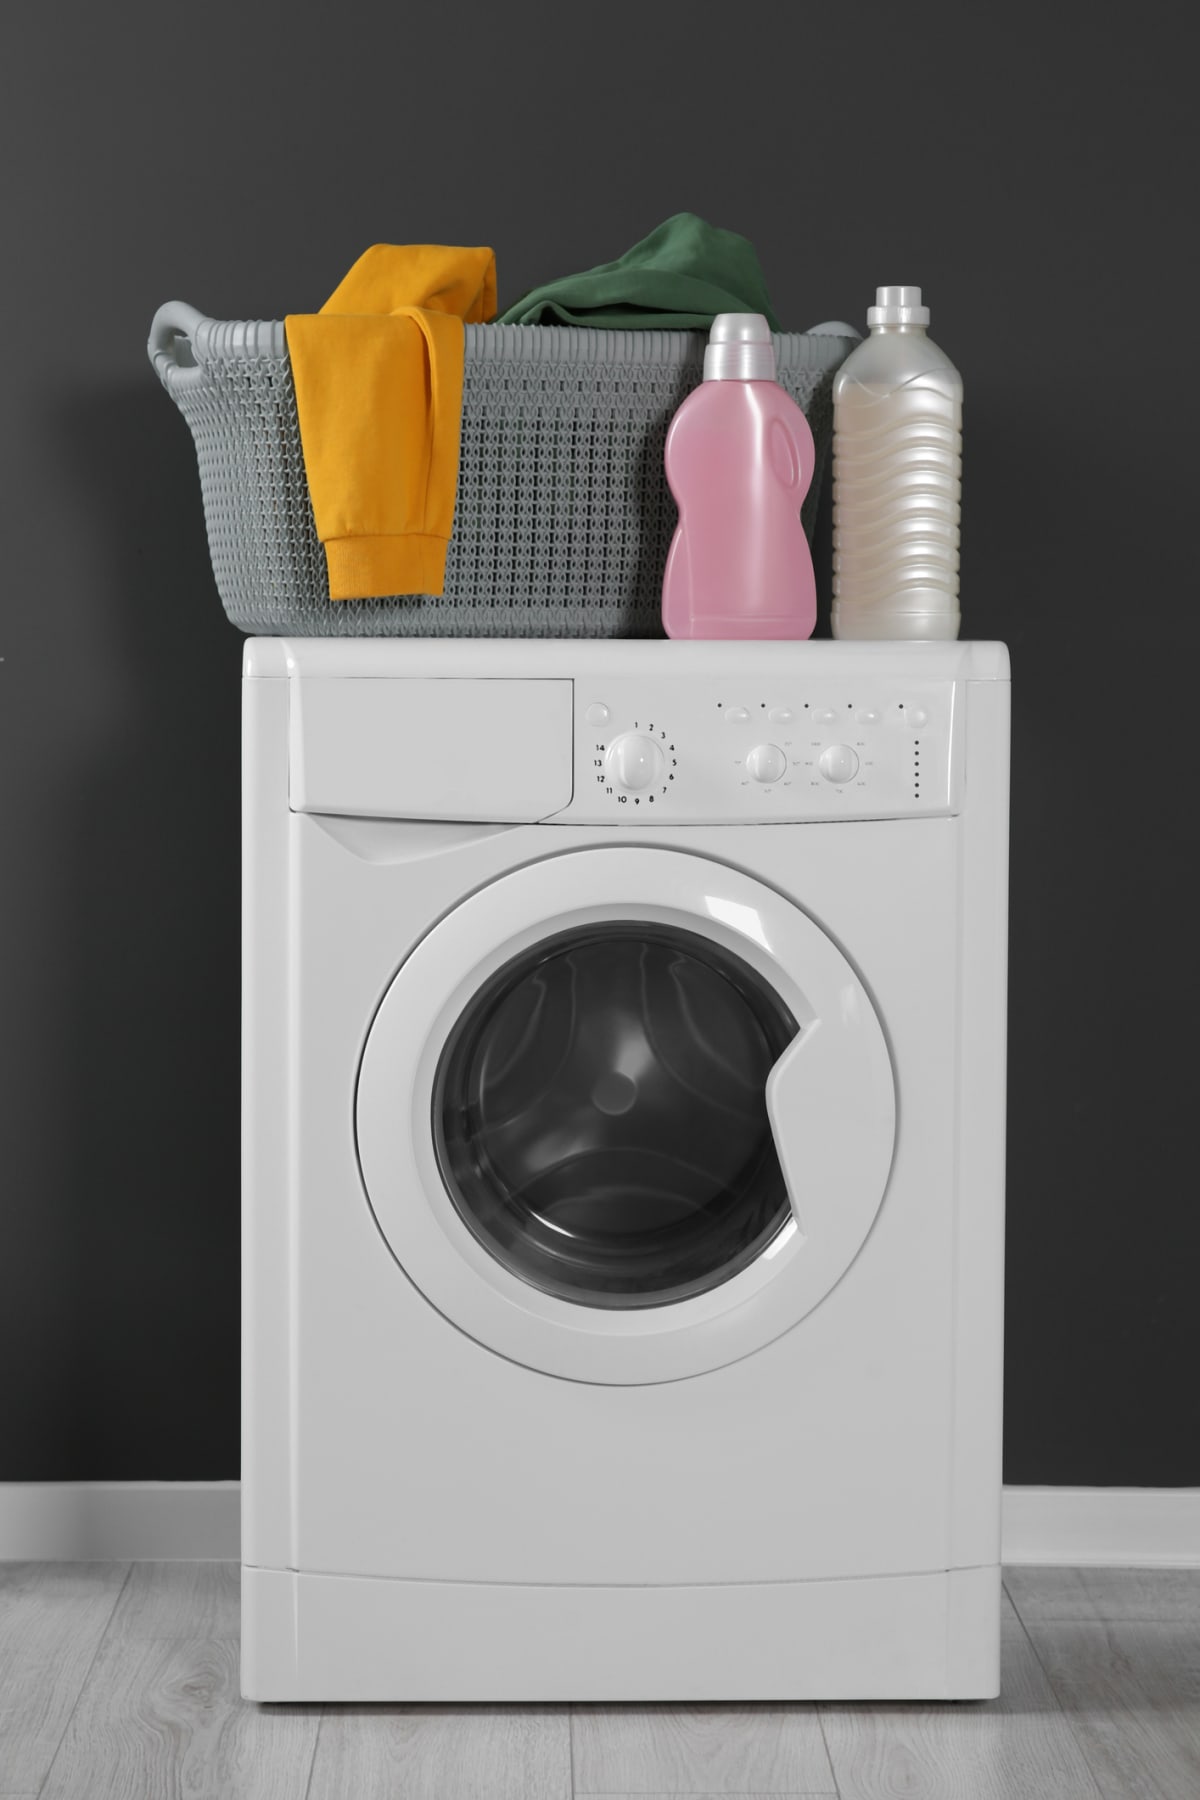 A laundry basket filled with clothes, a bottle of baby shampoo, and detergent, placed atop a washing machine